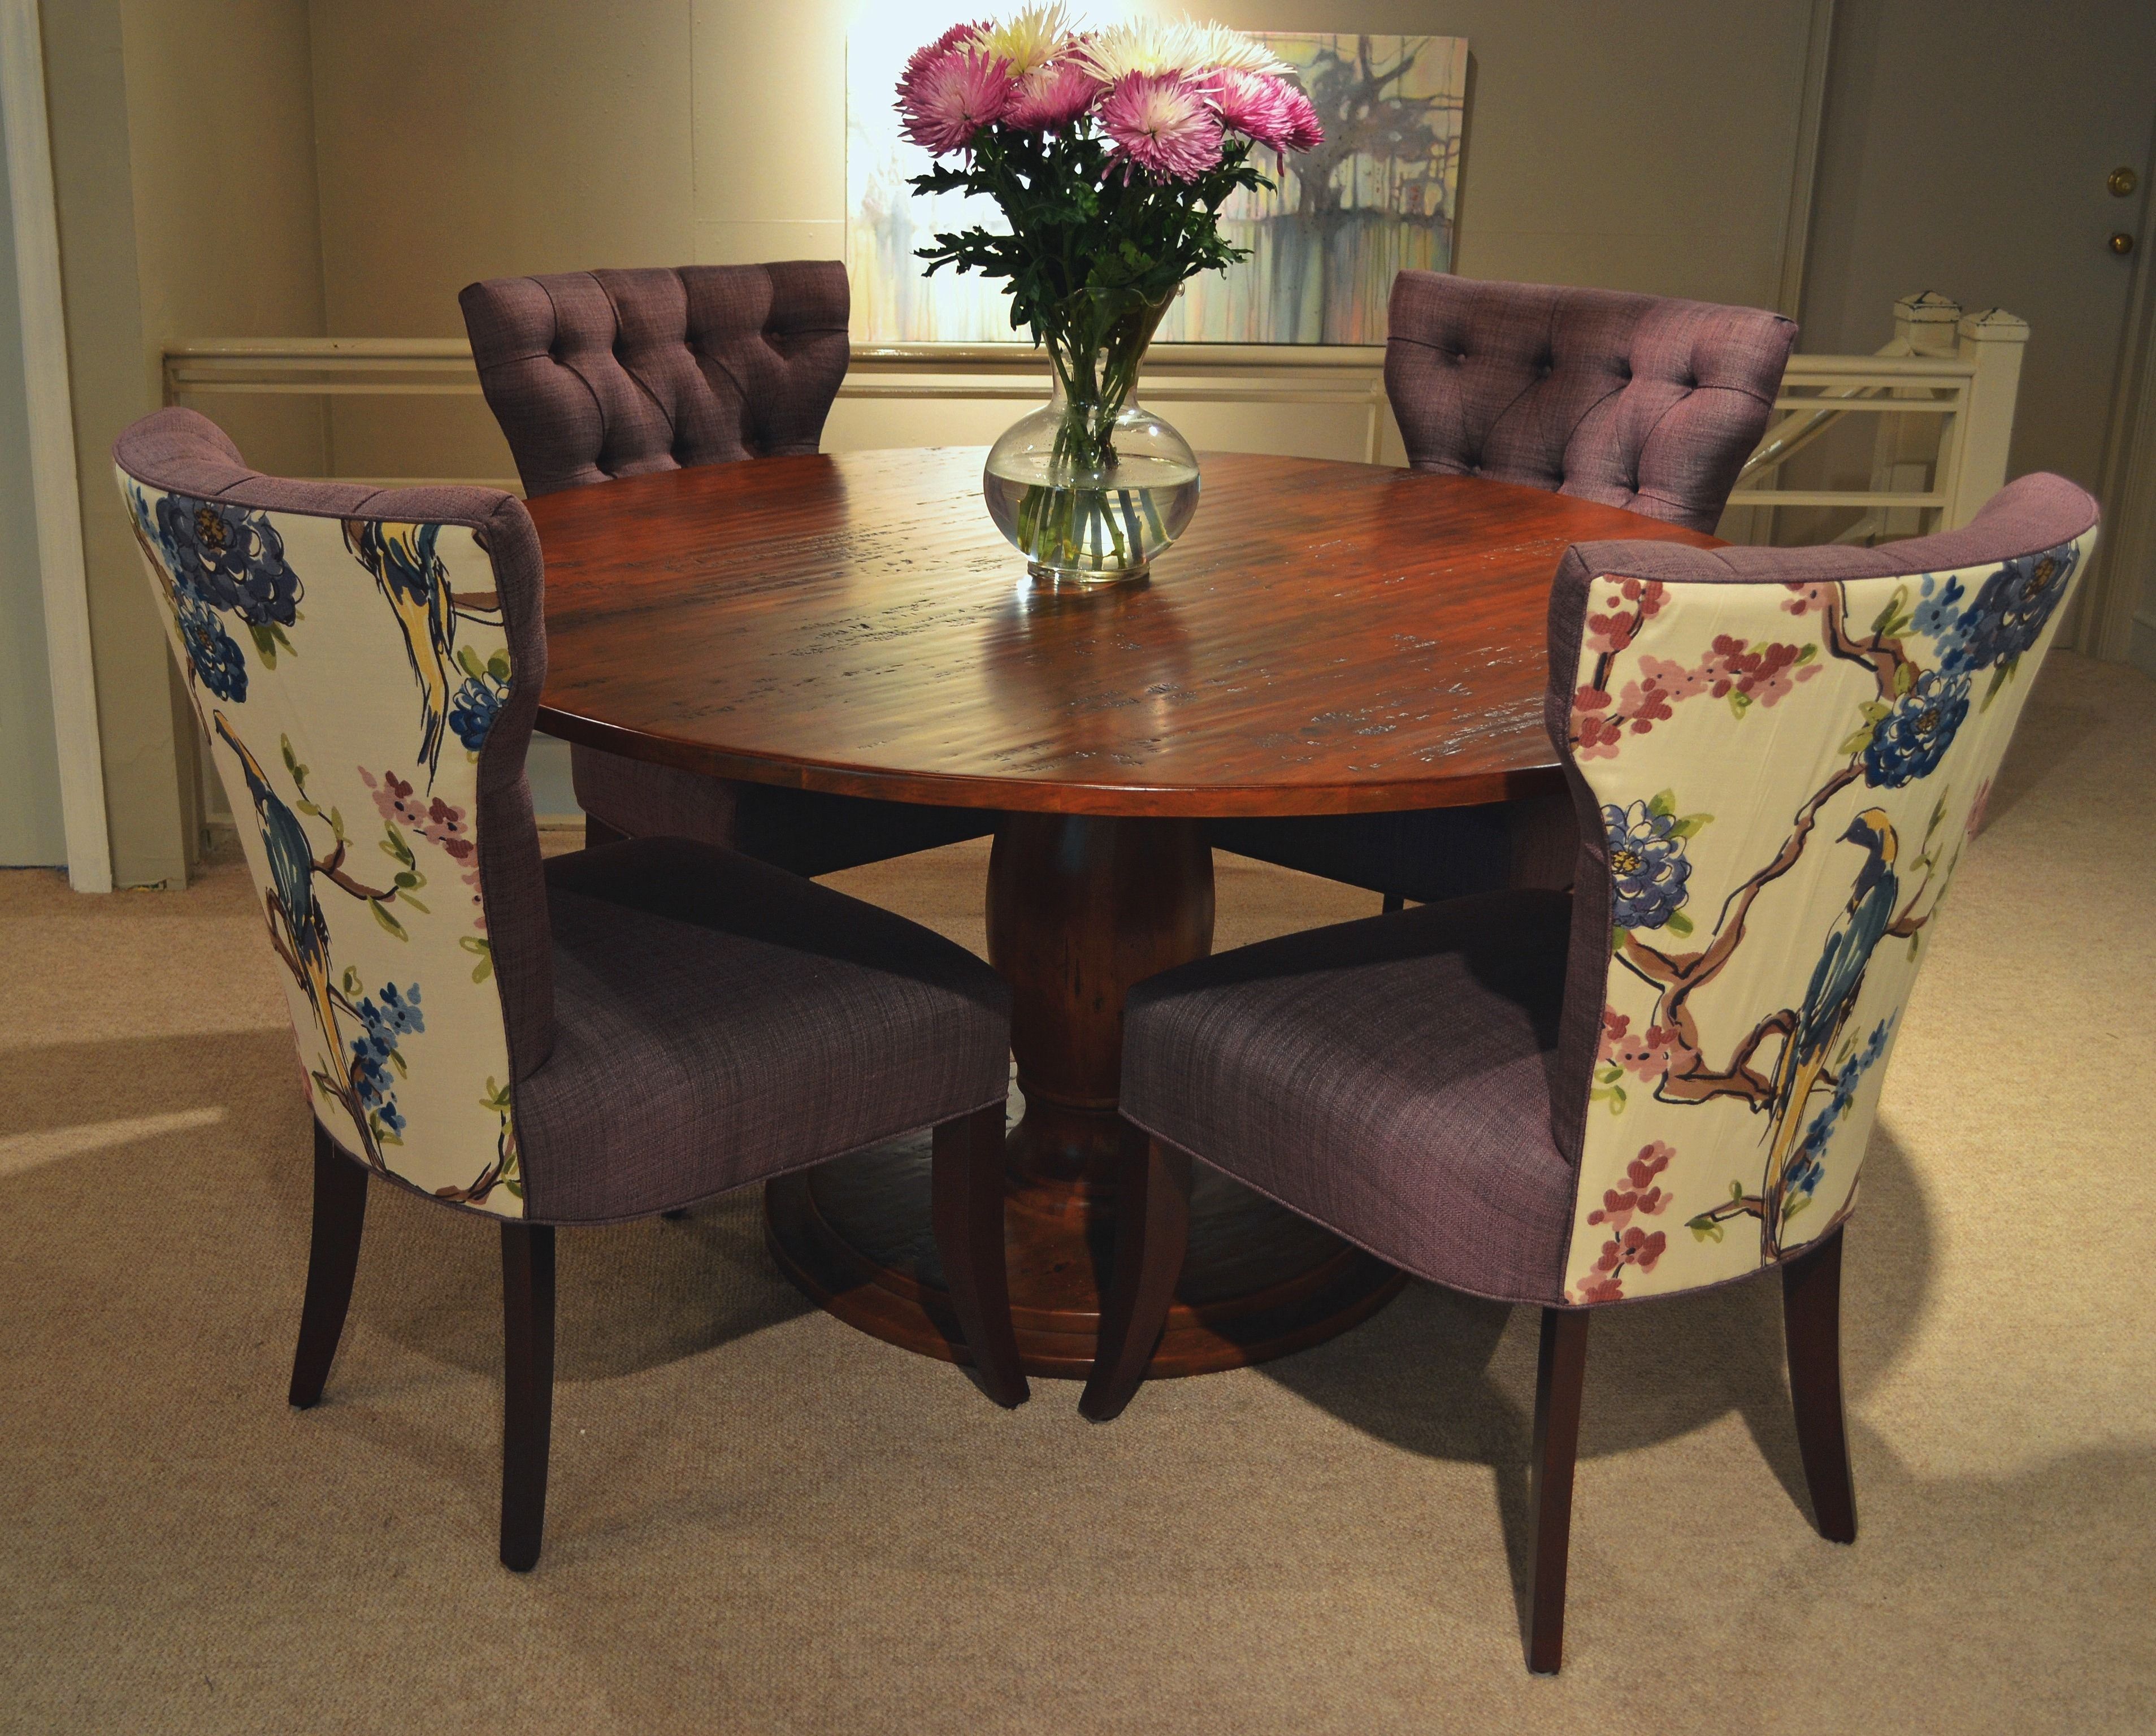 2019 Market Side Chairs Throughout Fitzgerald 01 524 Tufted Back Klismos Side Chairs – April  (View 11 of 20)